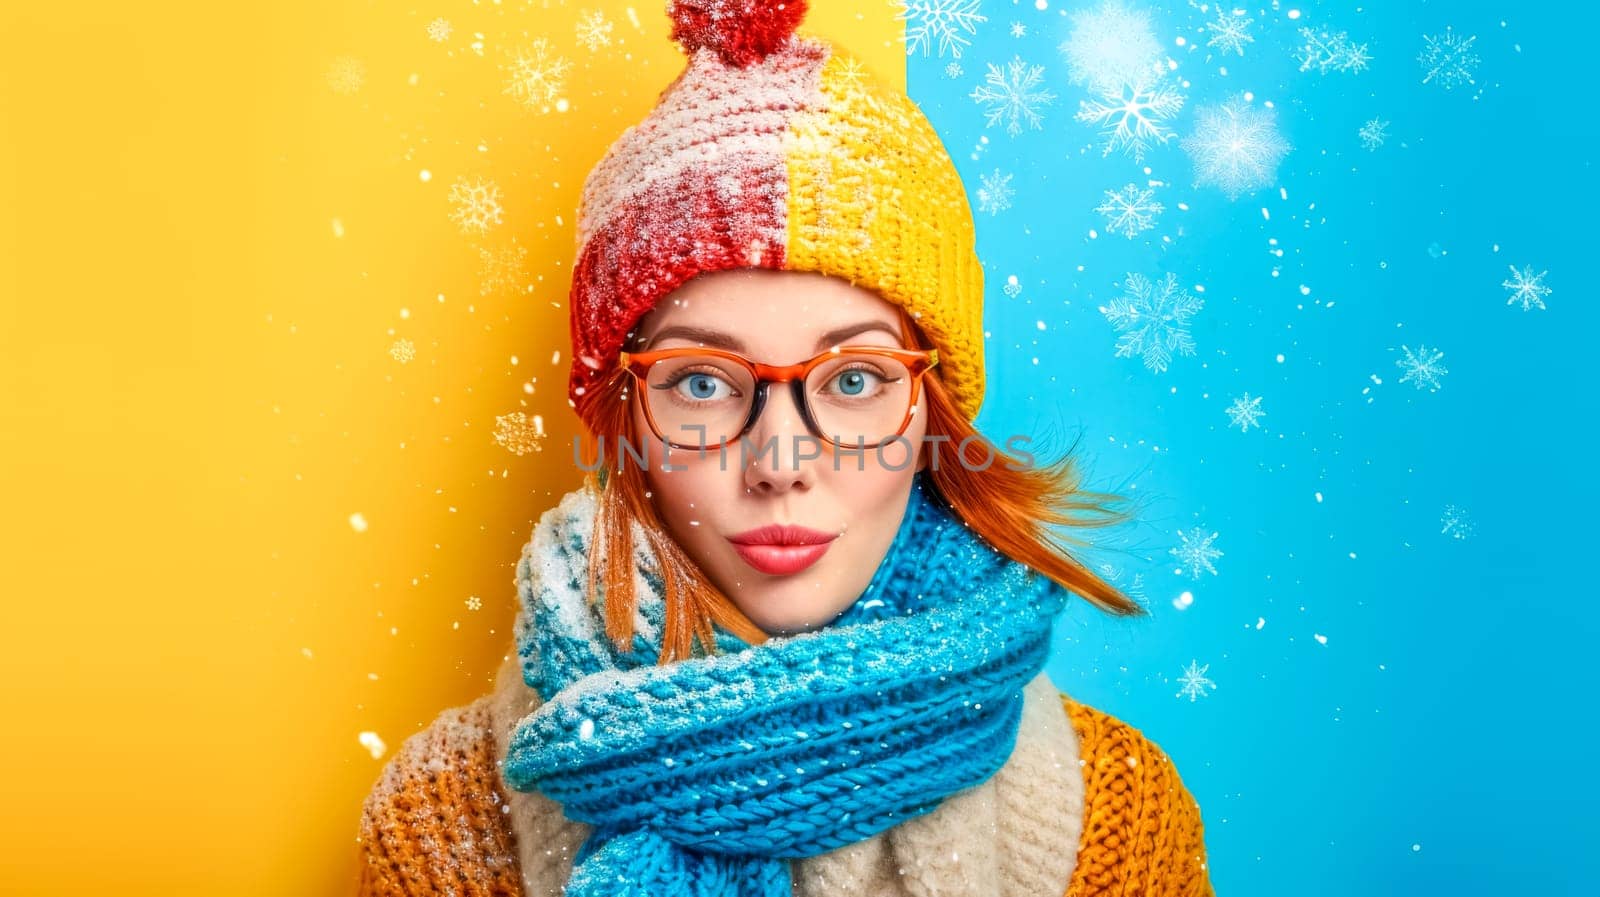 Young woman in vibrant winter attire against a split blue and yellow backdrop with falling snowflakes